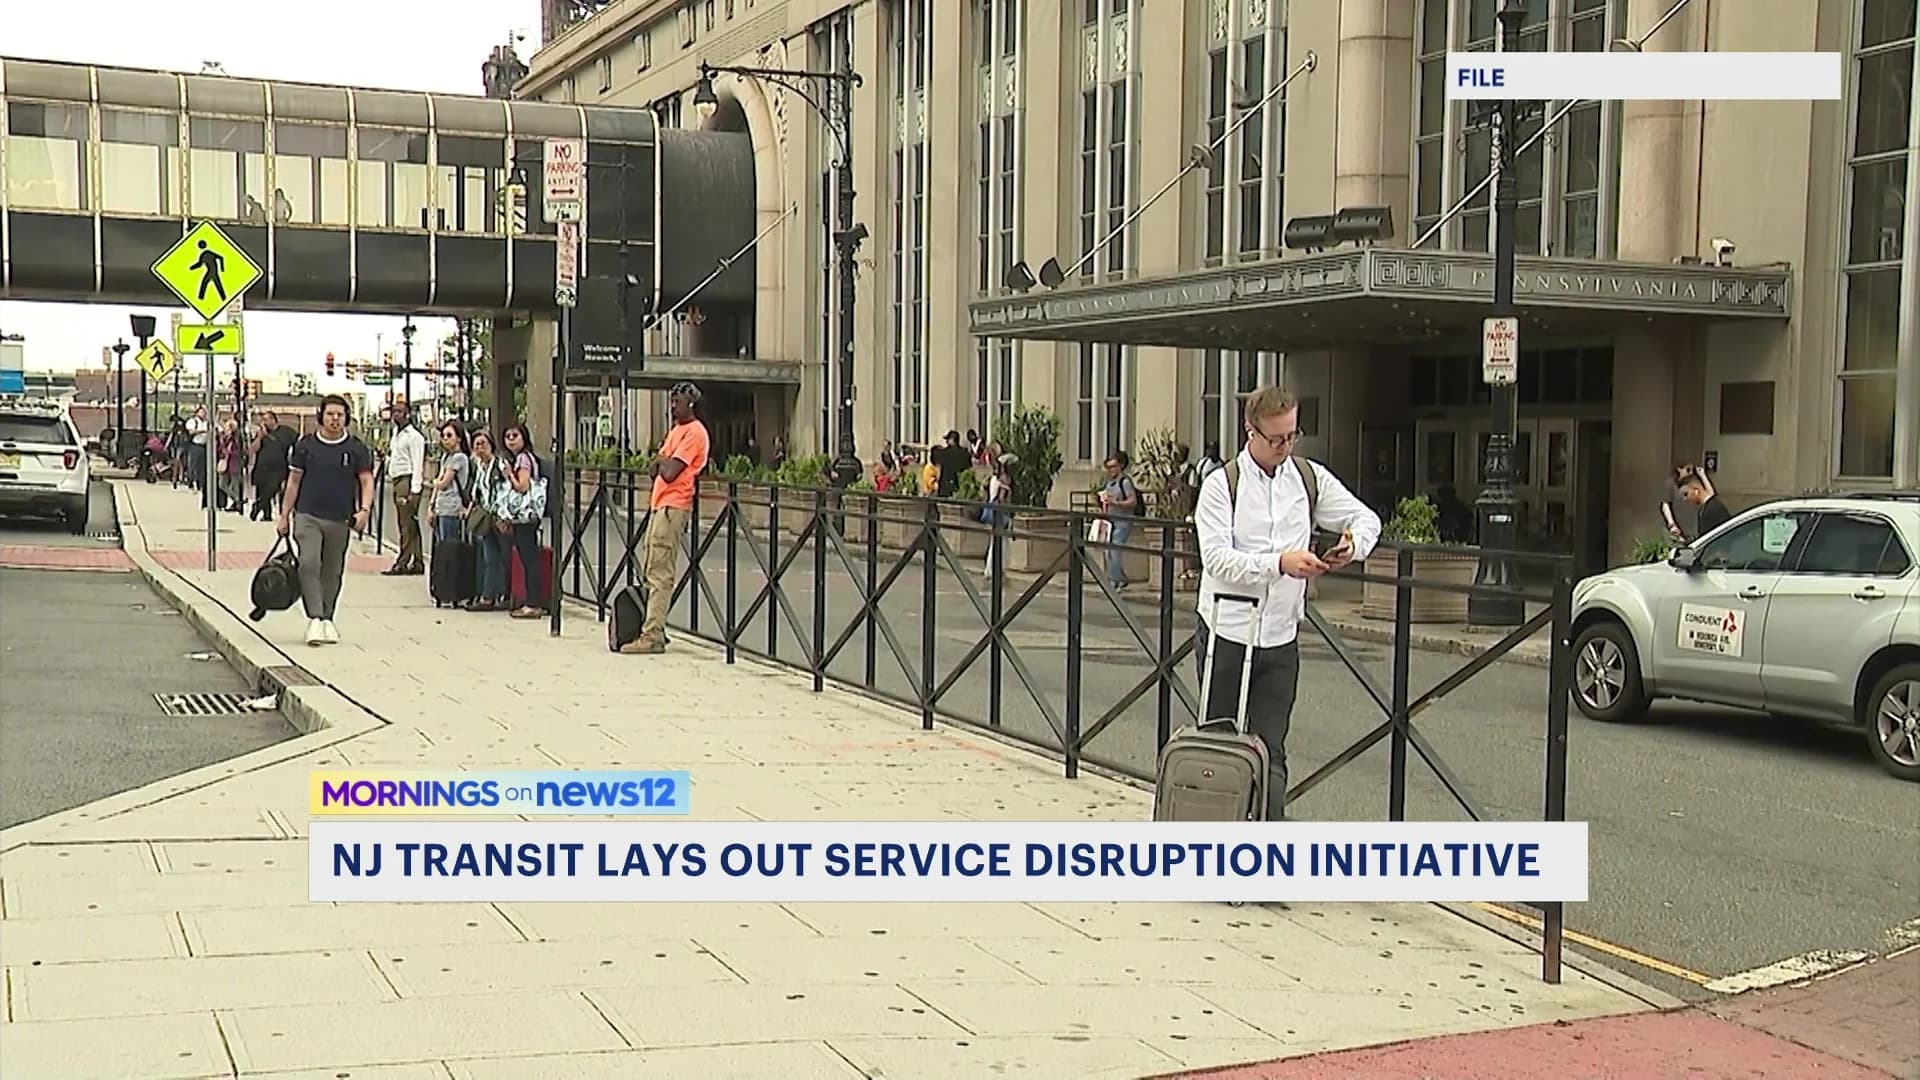 NJ Transit, Amtrak lay out service disruption initiative following Amtrak system failures in May